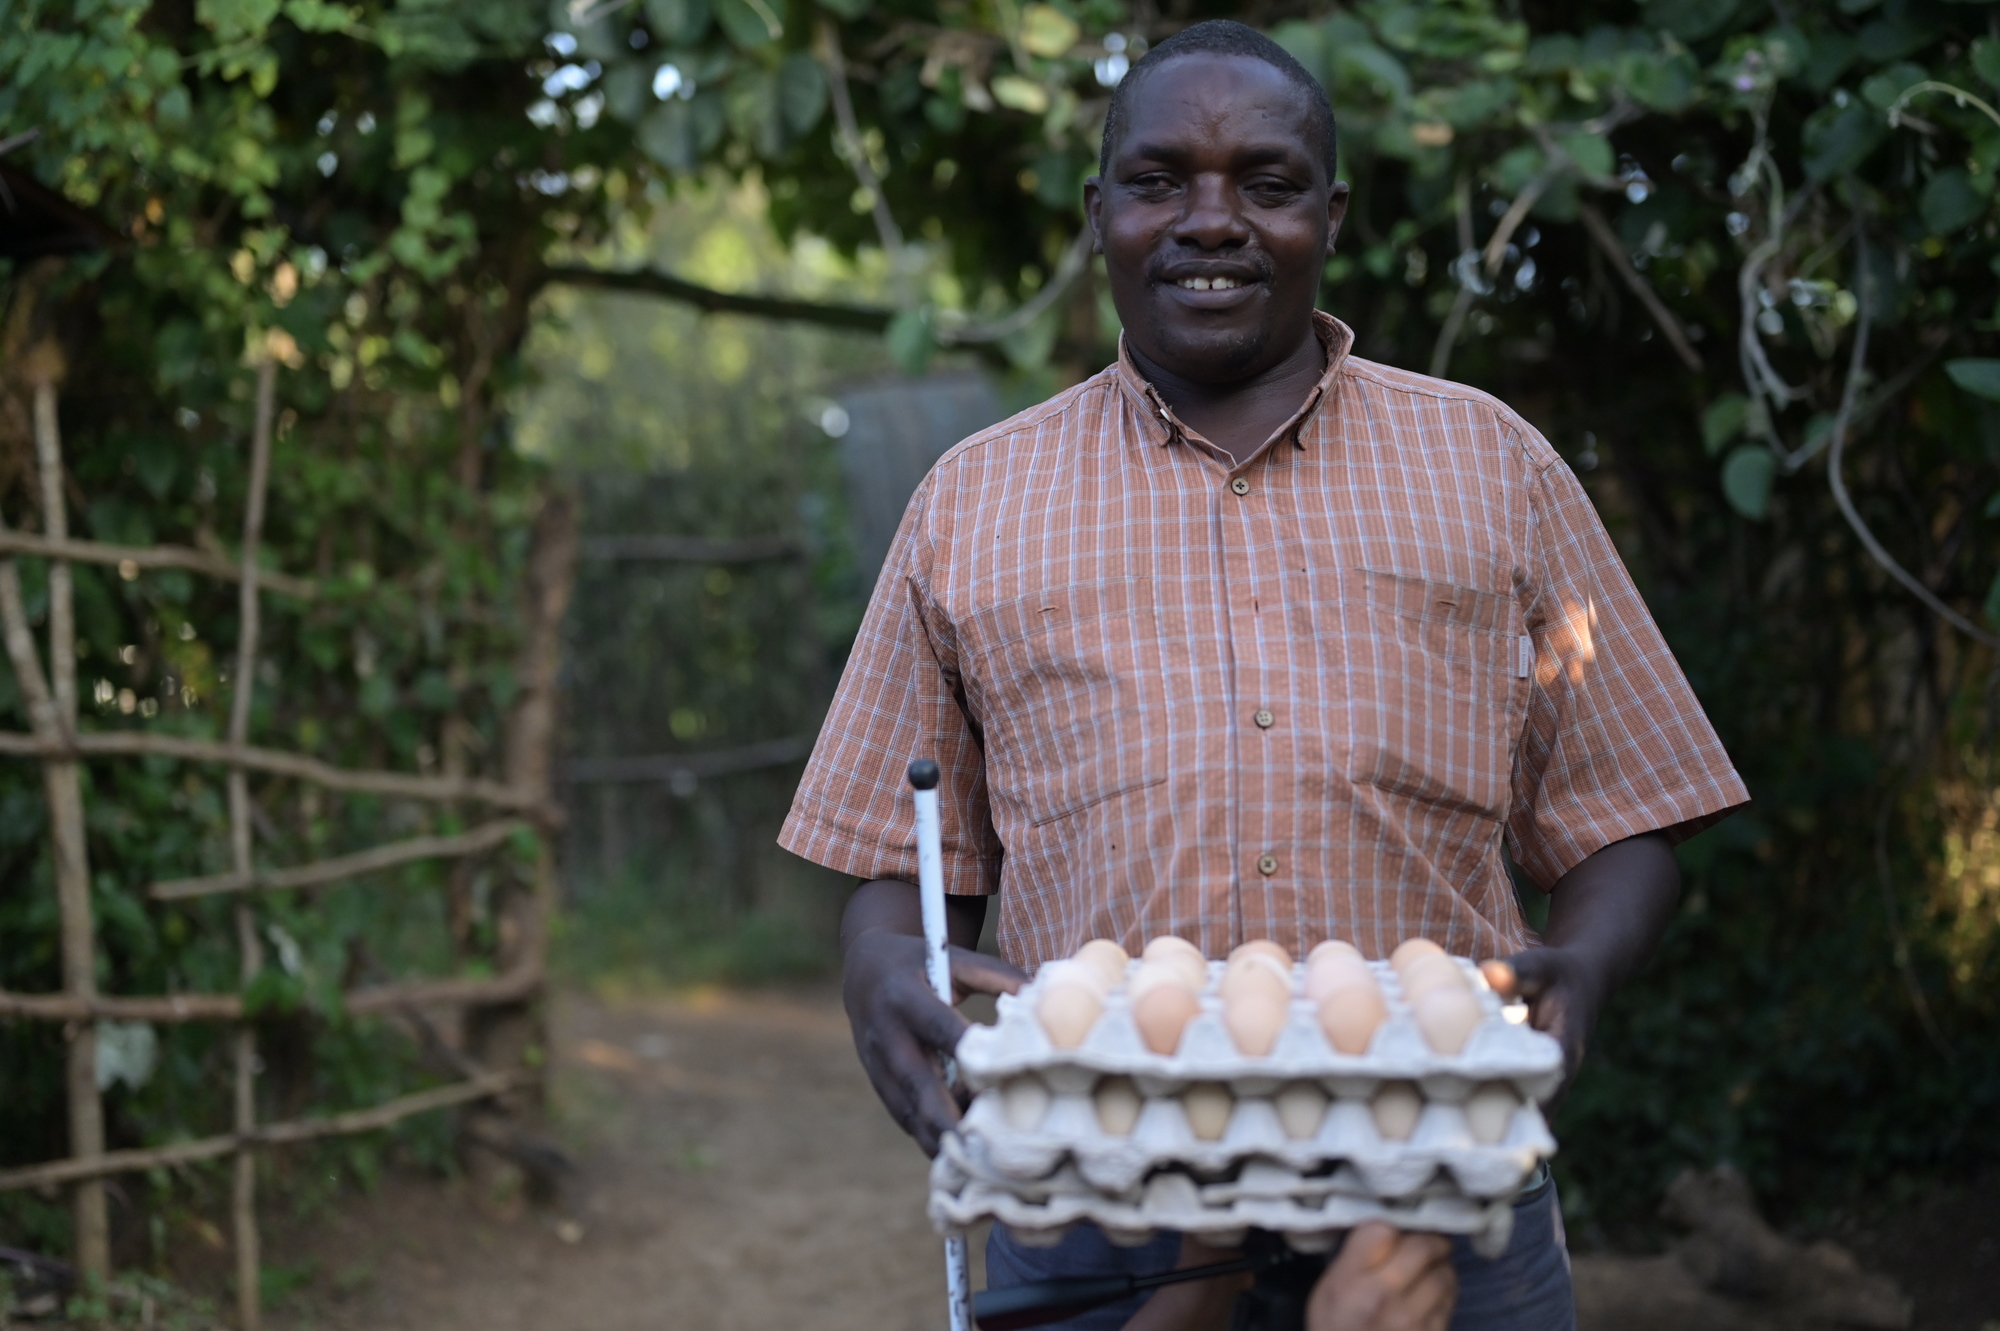 Gallery image showing Light for the World's economic inclusion work in Kenya